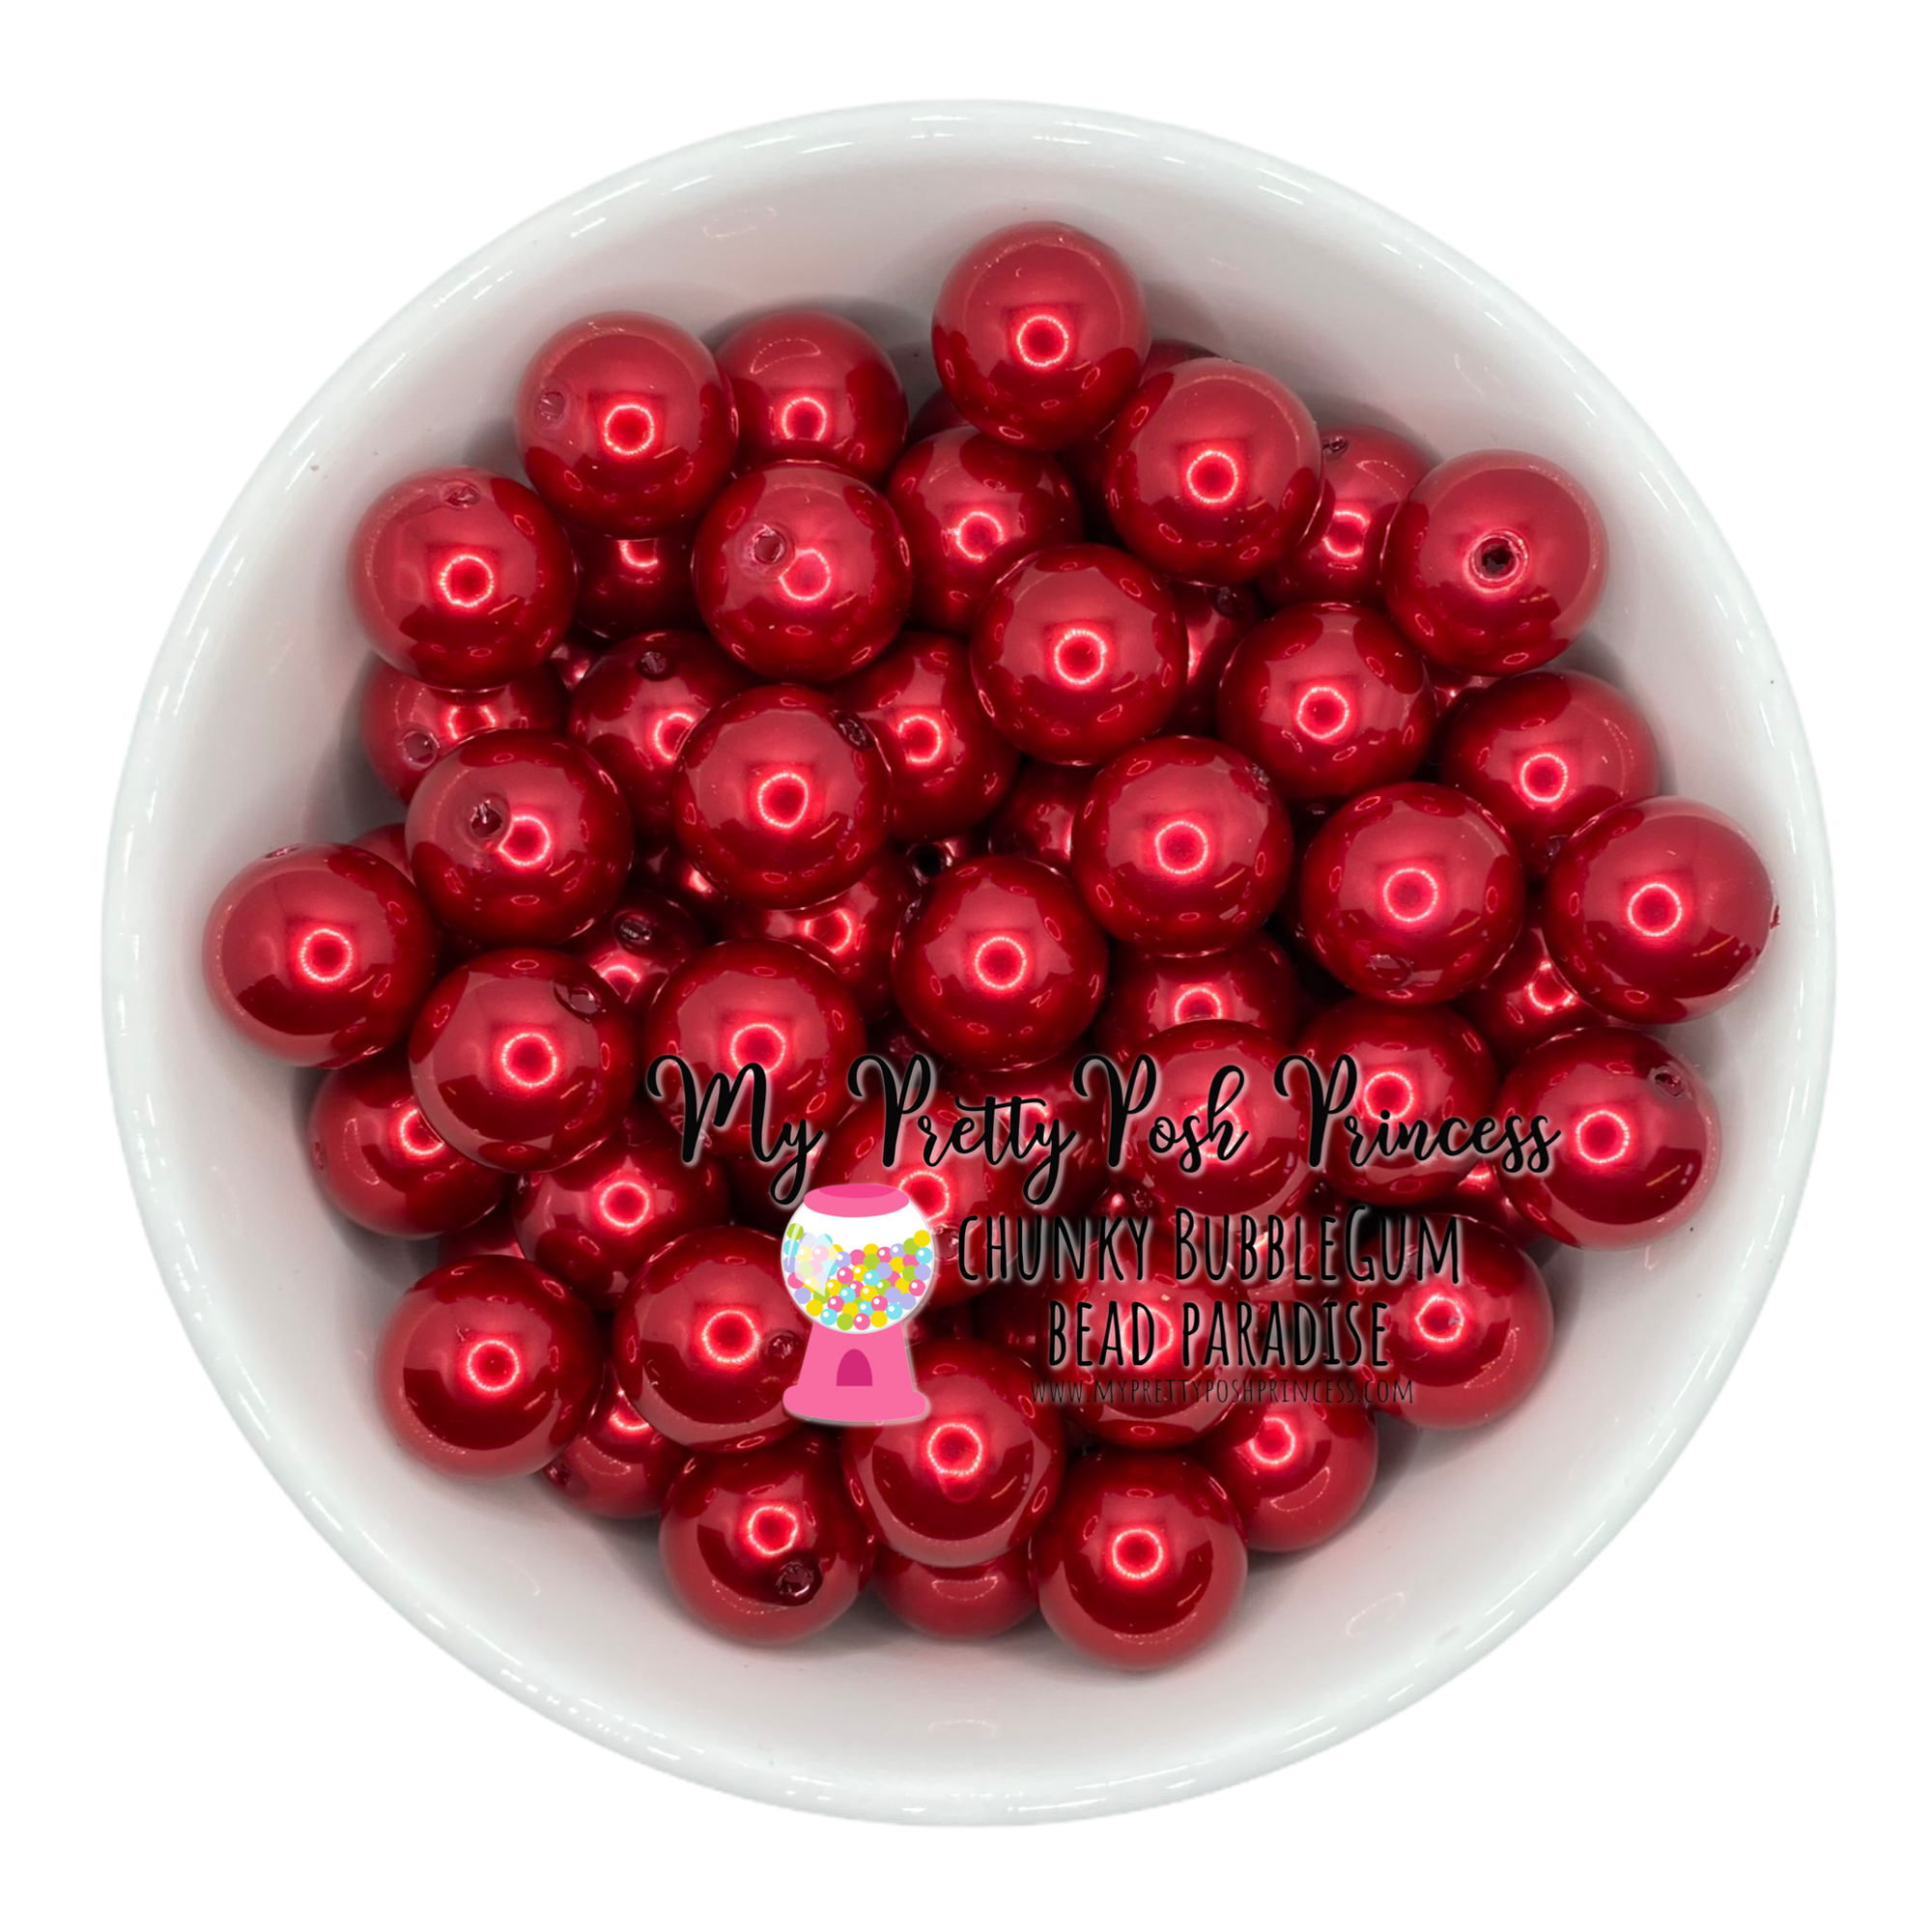 a60- 12mm Red Faux Pearl Chunky Bubble Gum Acrylic Beads (20 Count)